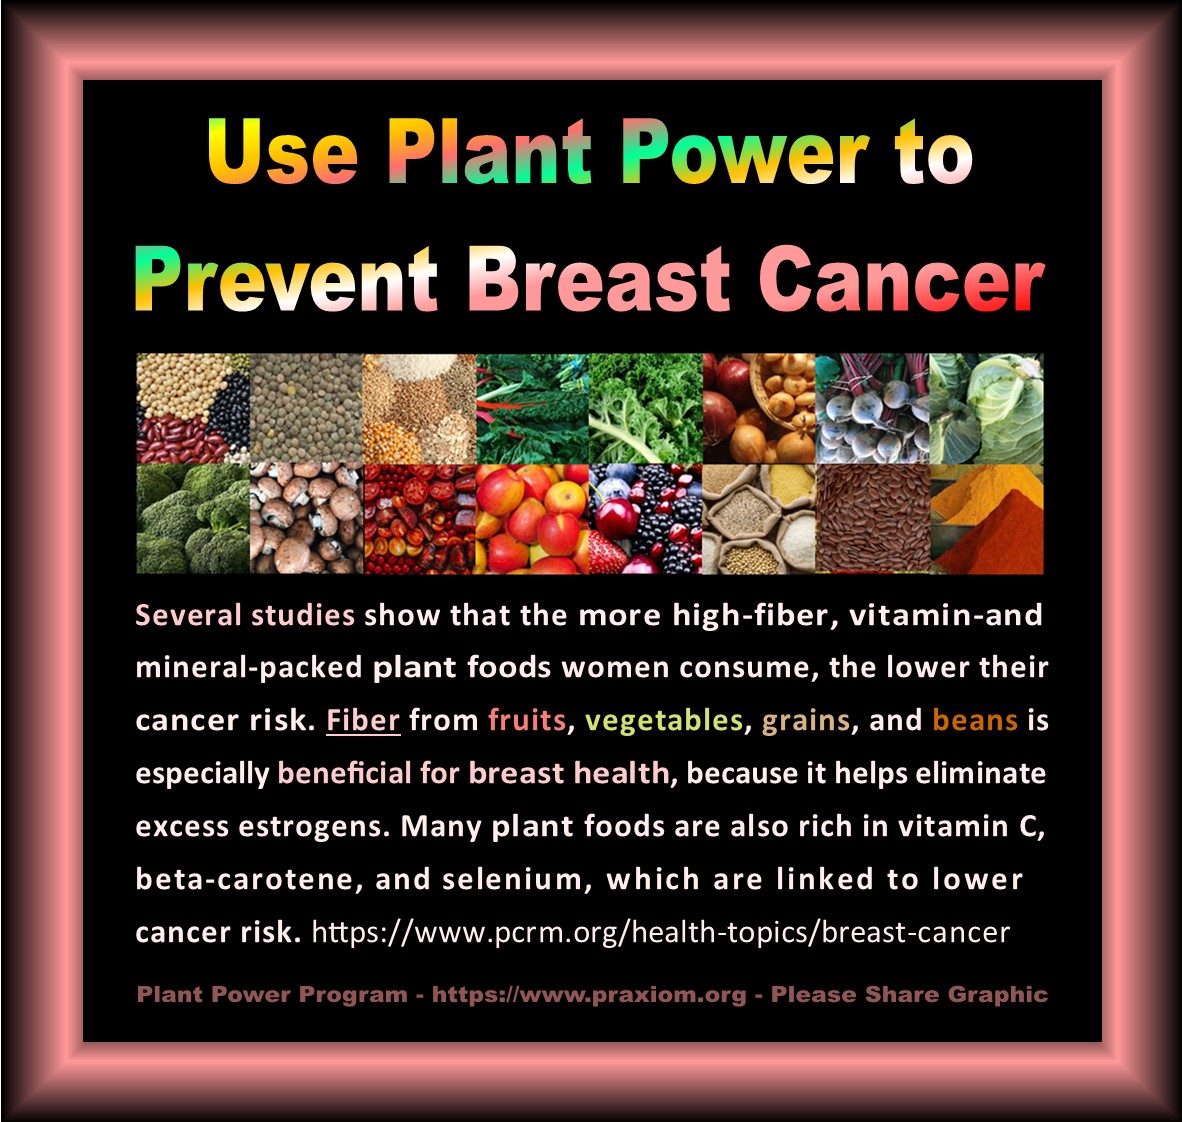 Use Plant Power to Prevent Breast Cancer - Dr. Neal Barnard